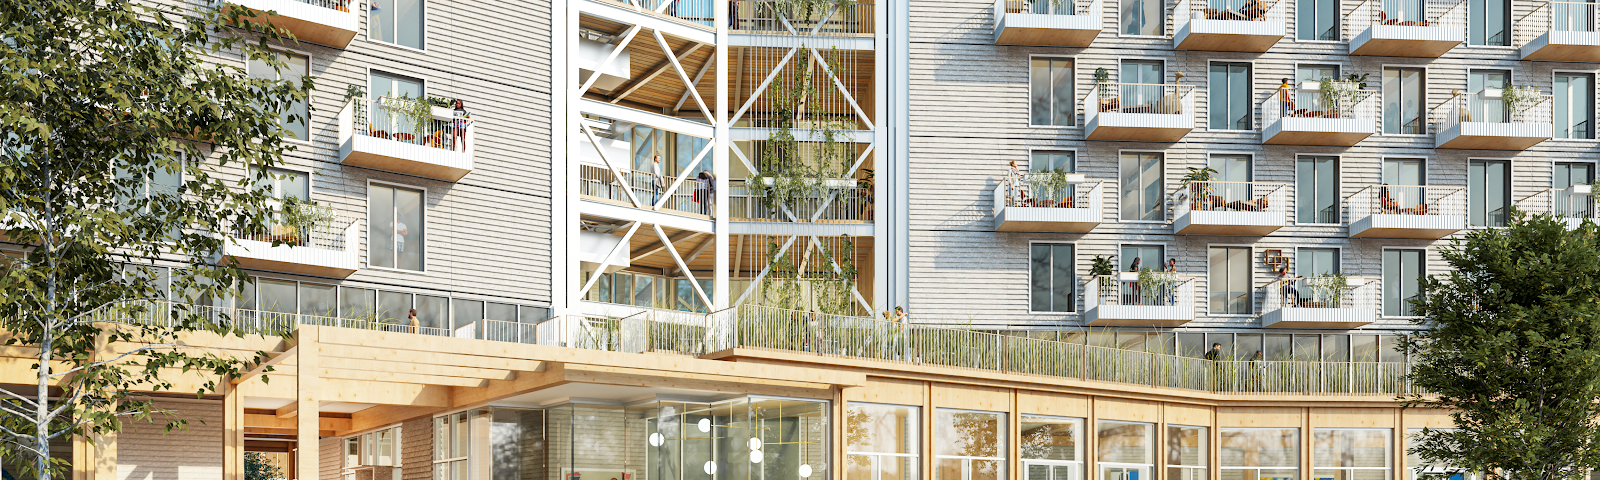 A rendering of a mass timber building model by Sidewalk Labs.